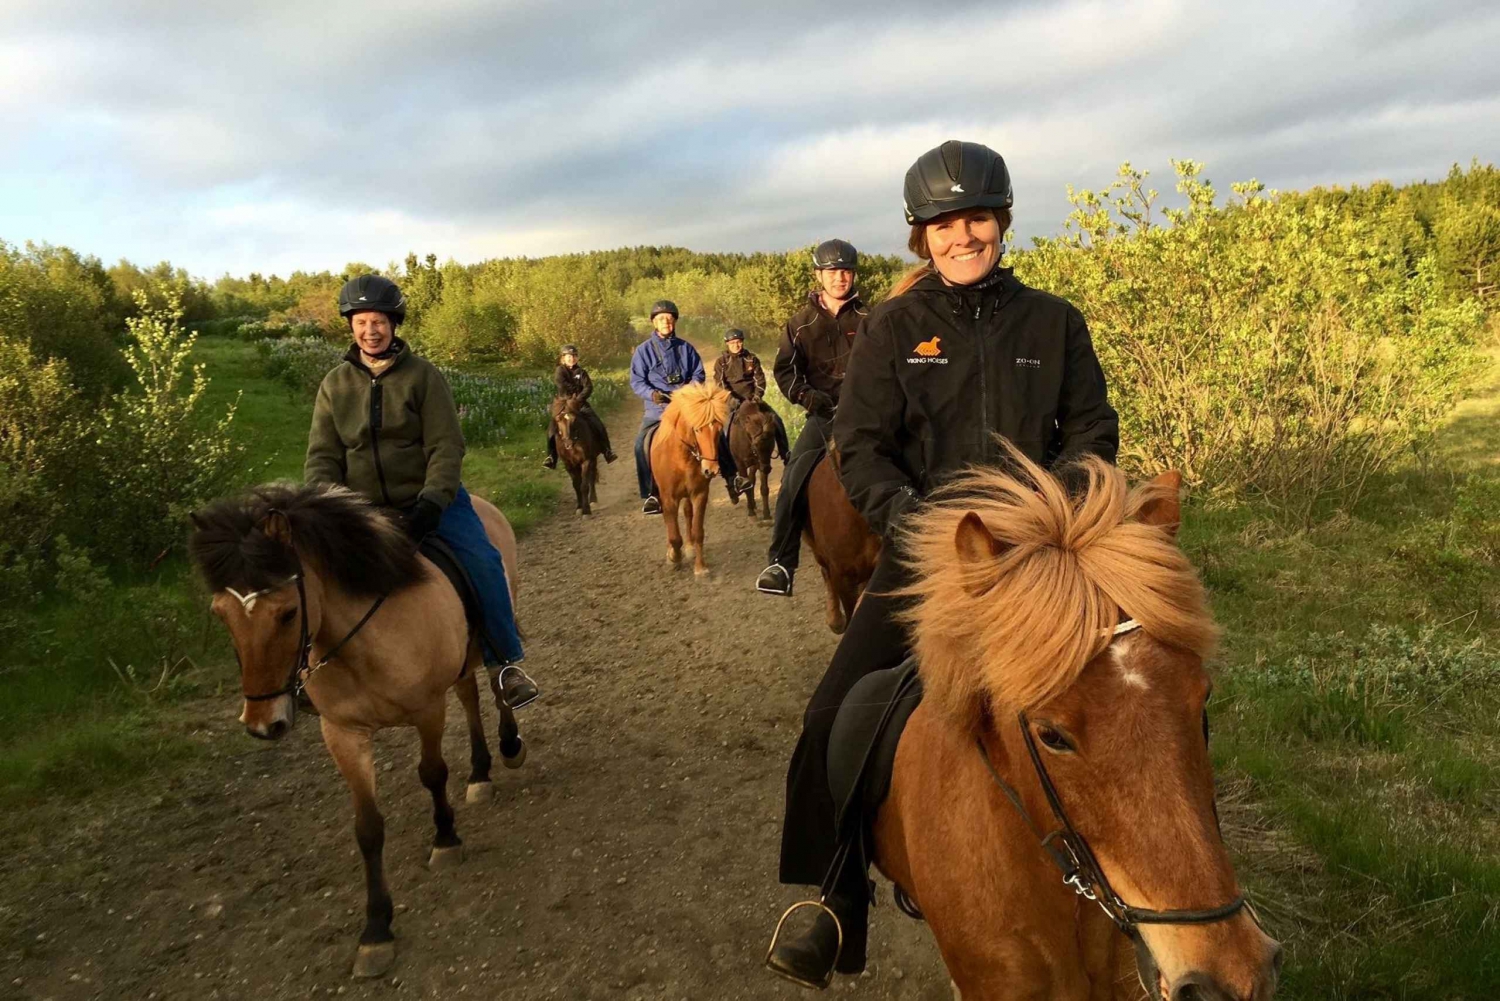 From Reykjavik: Small-Group Horse Riding Tour with Pickup